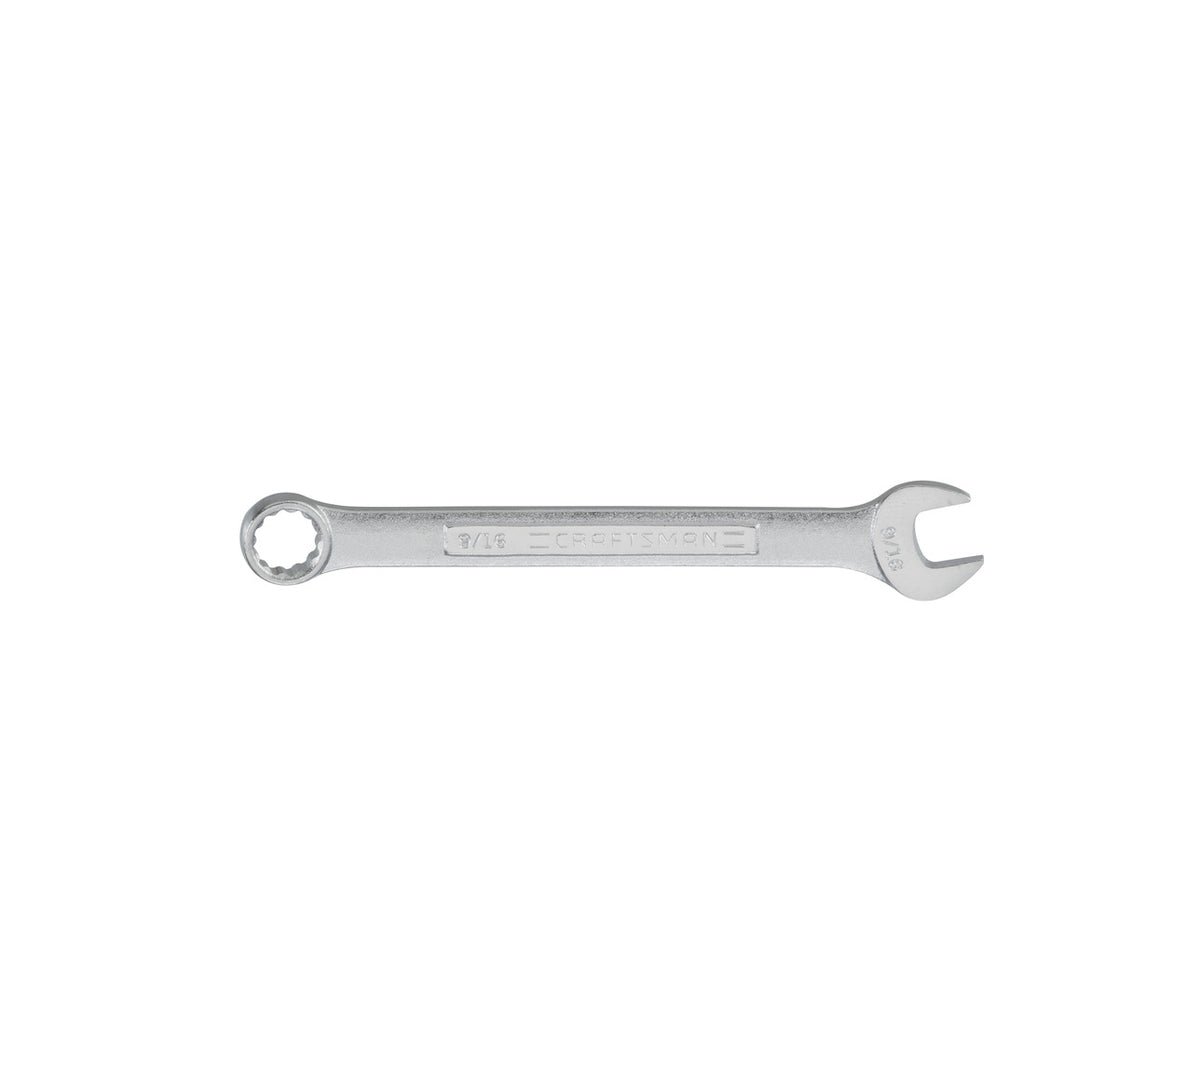 Craftsman CMMT44696 12 Point SAE Combination Wrench, 9/16 inch